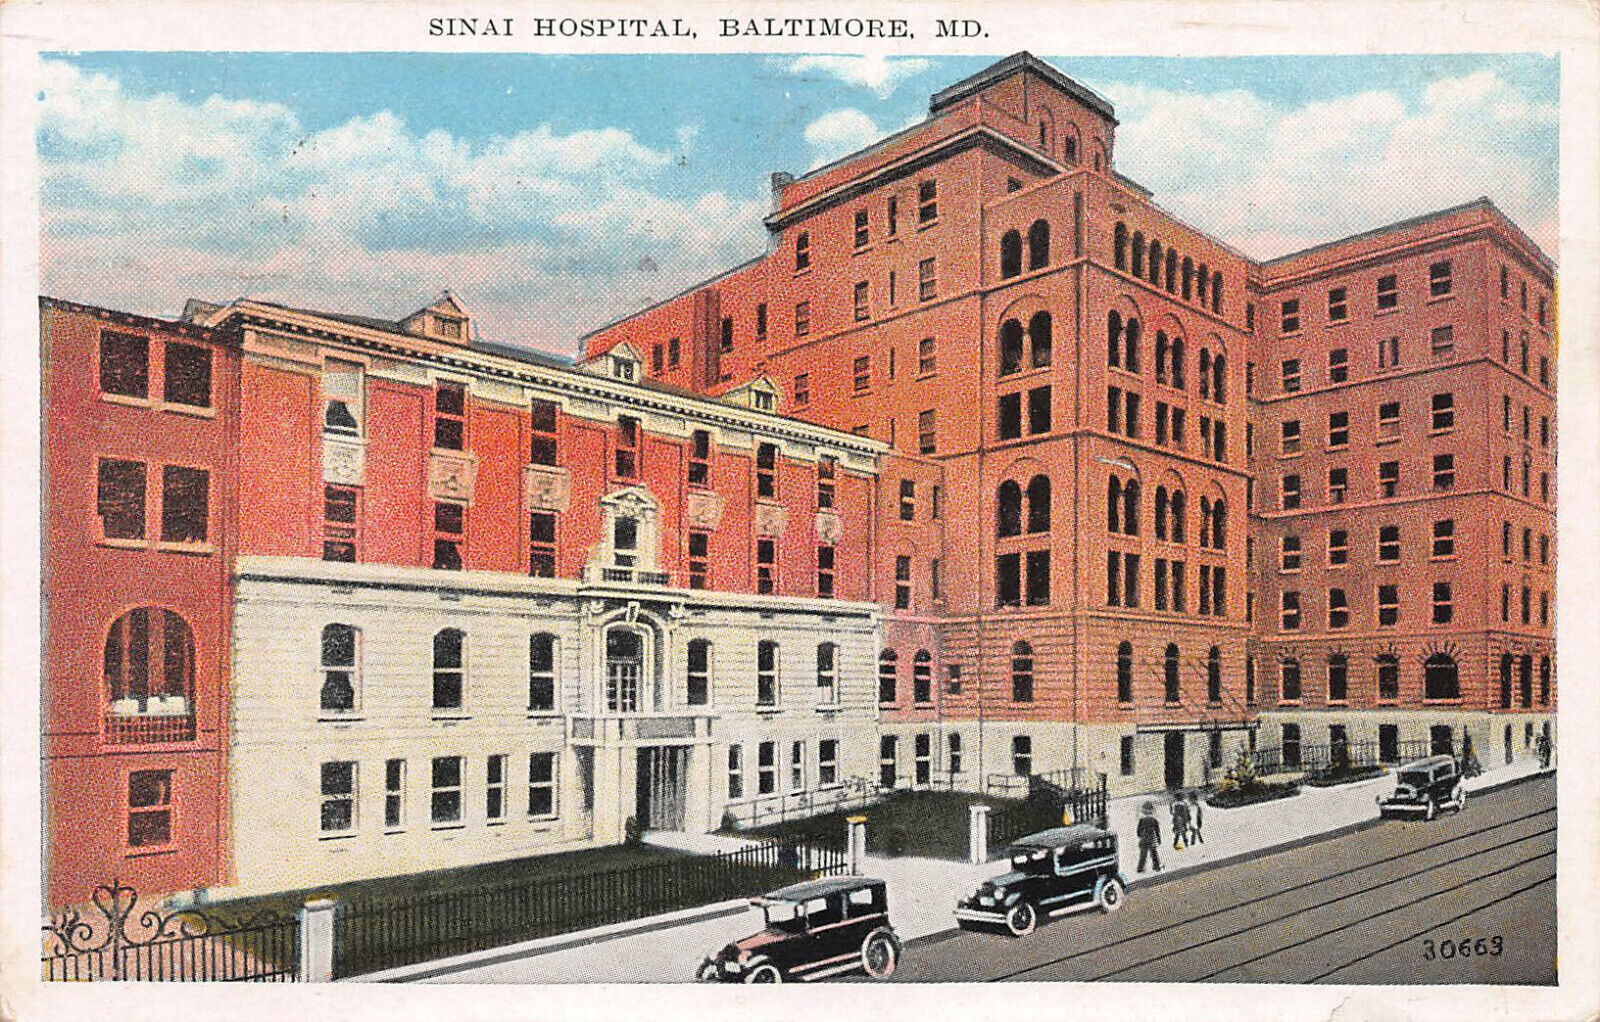 Sinai Hospital, Baltimore, Maryland, Early Postcard, Used in 1936